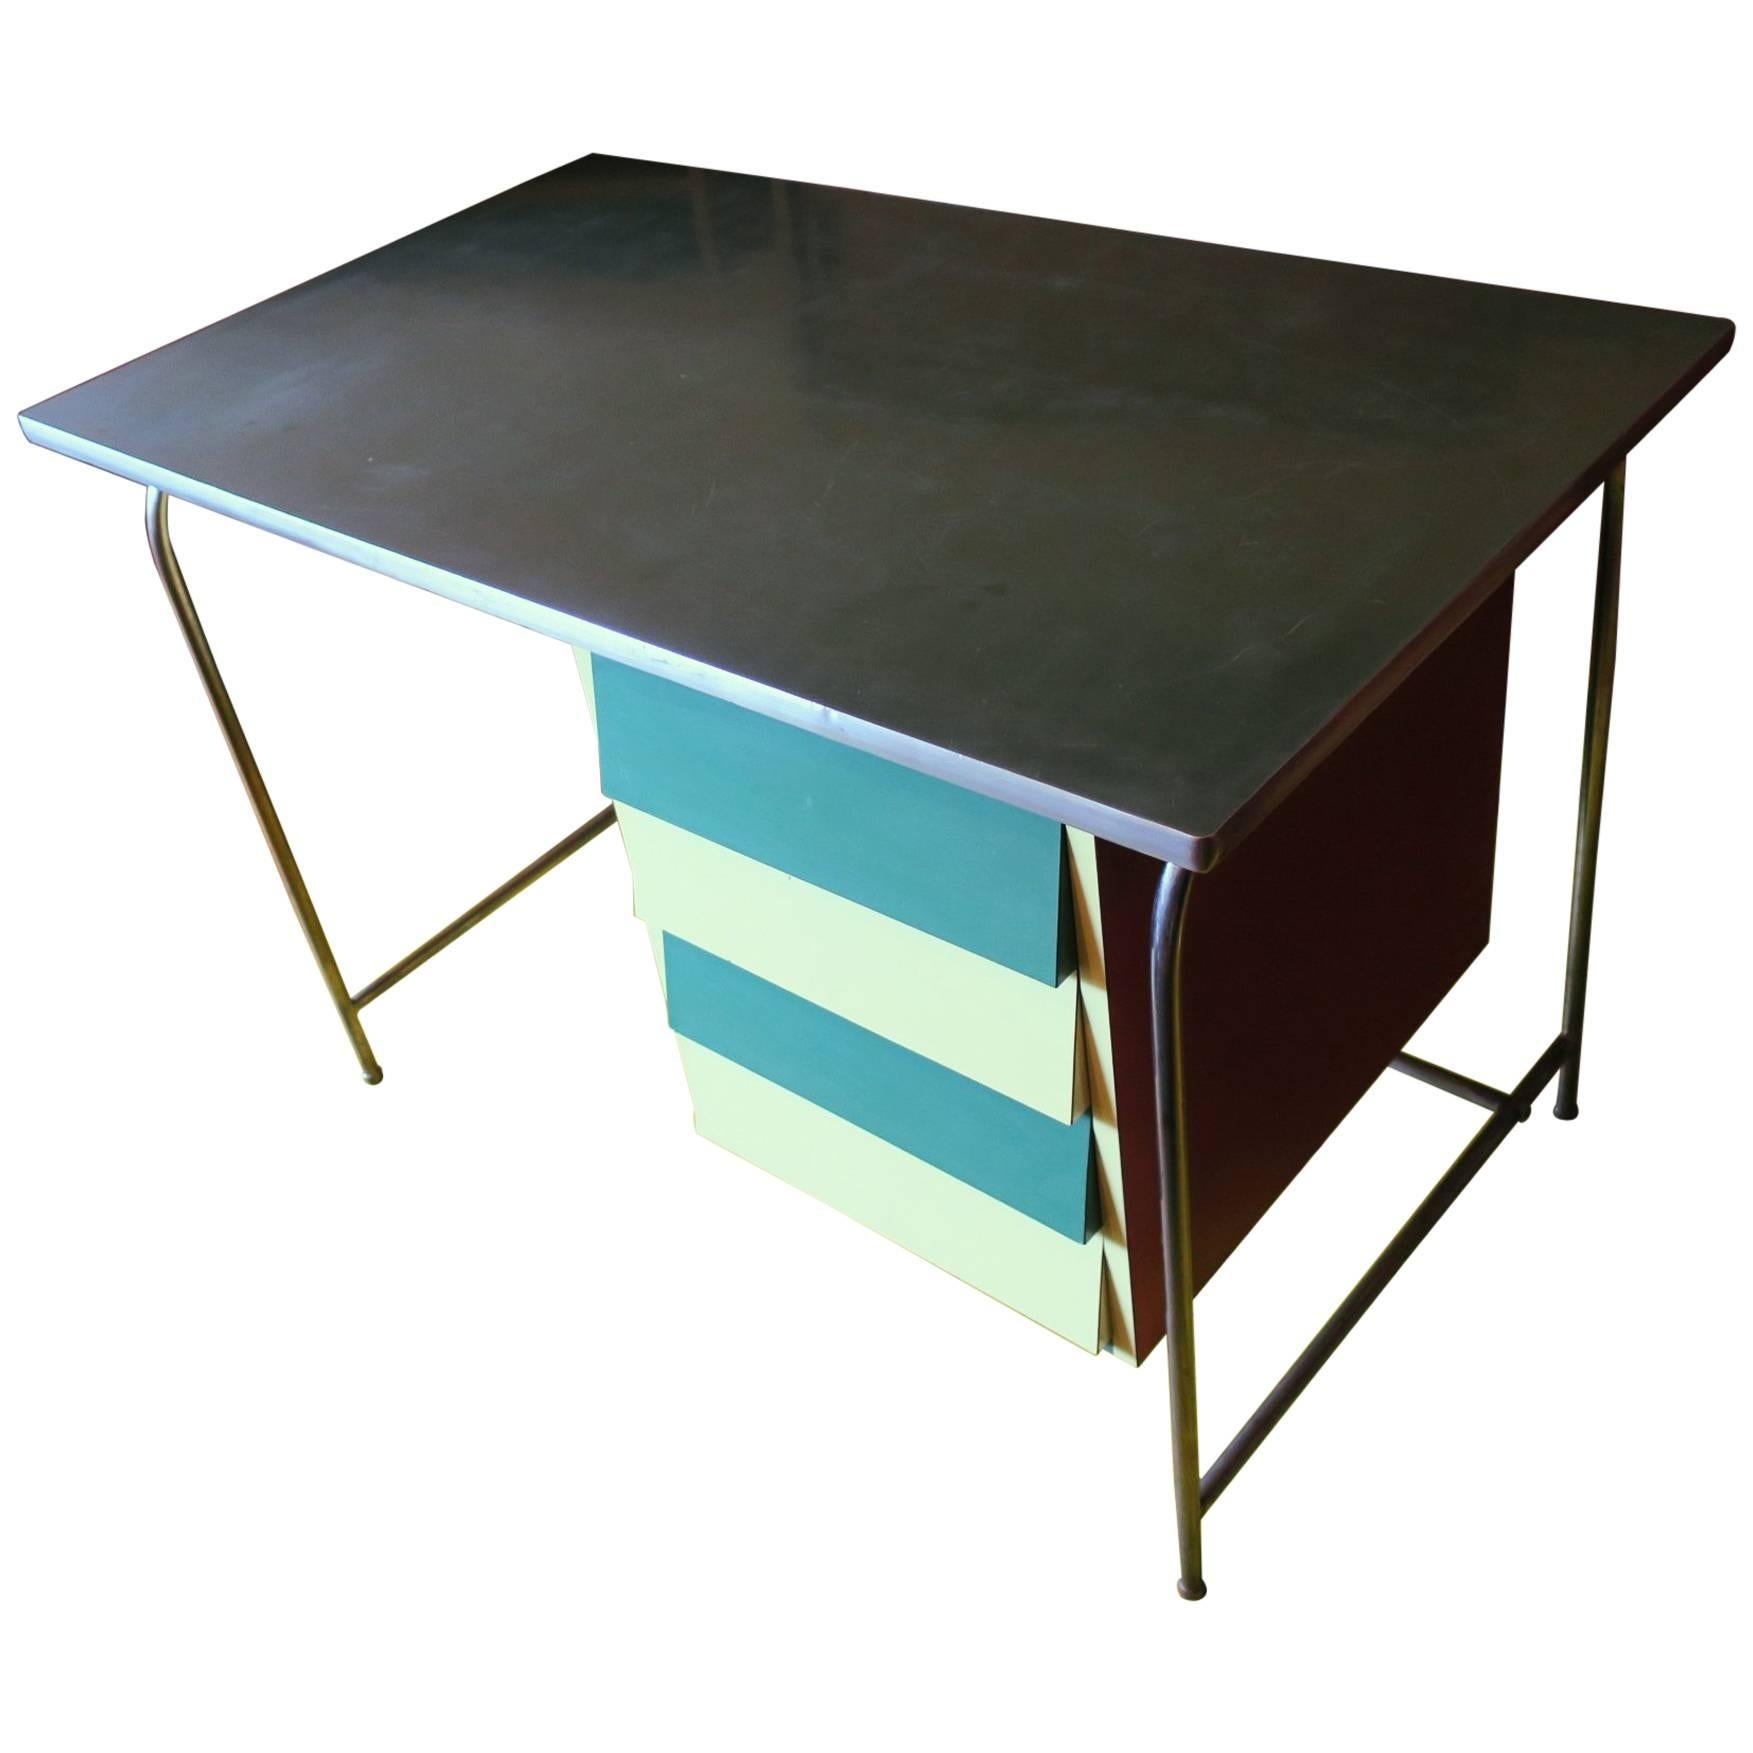 Colorful Italian Tubular Steel and Formica Desk, 1950s-1960s For Sale